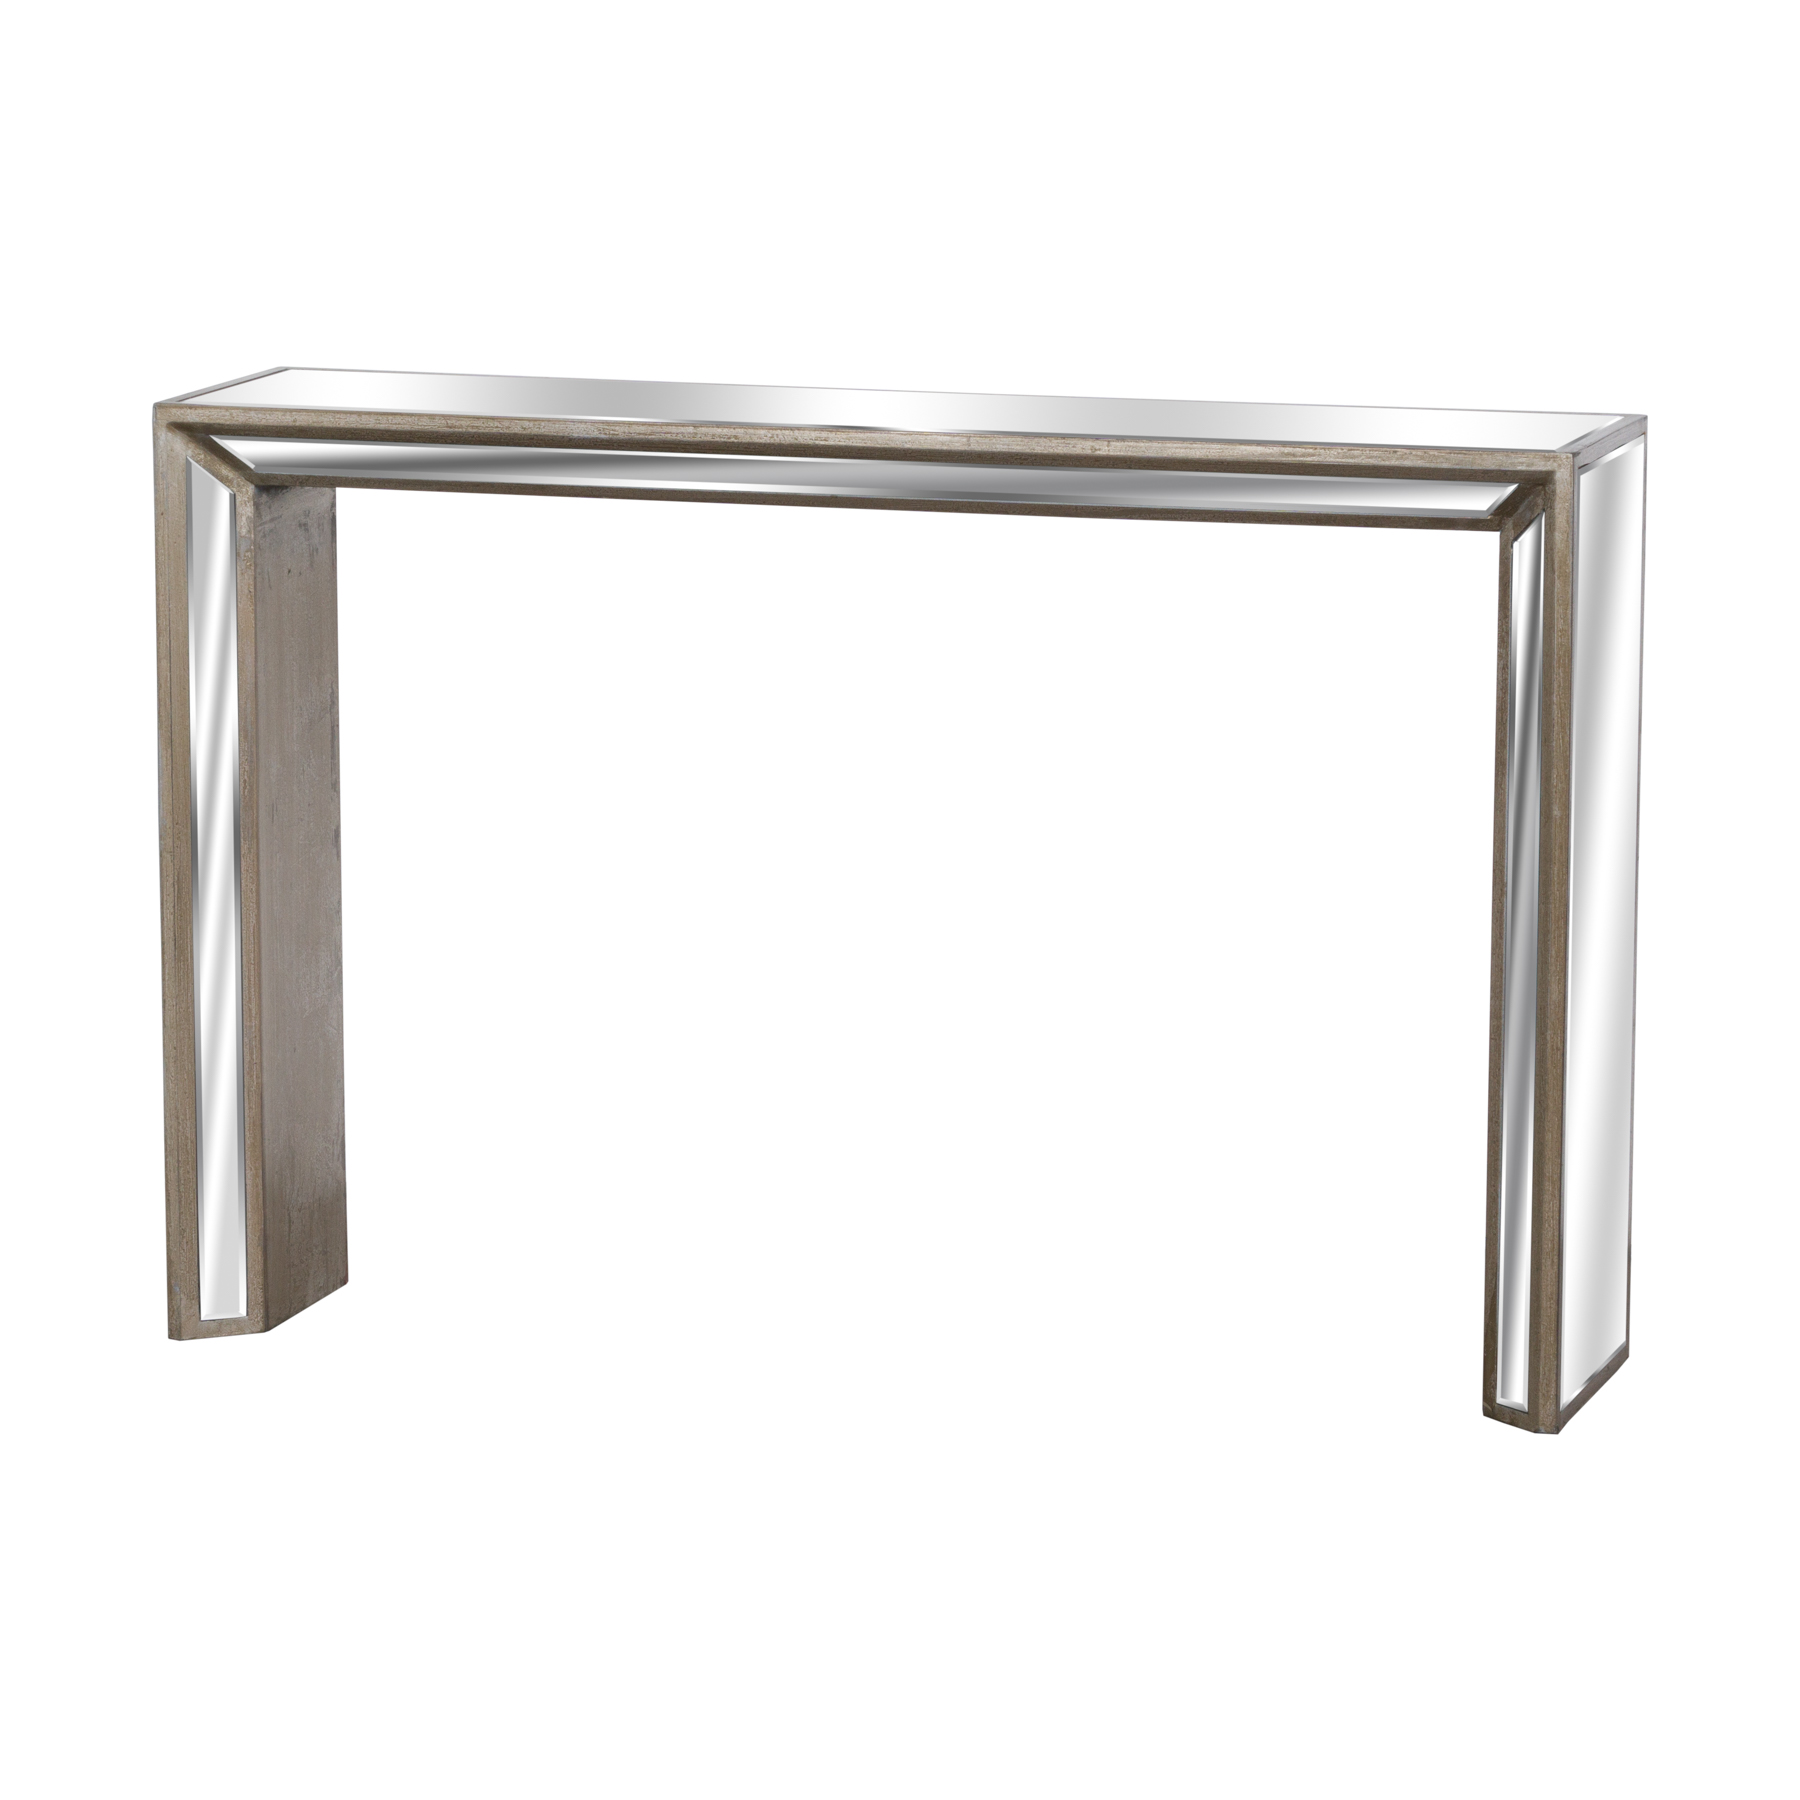 Augustus Mirrored Console Table - Image 1